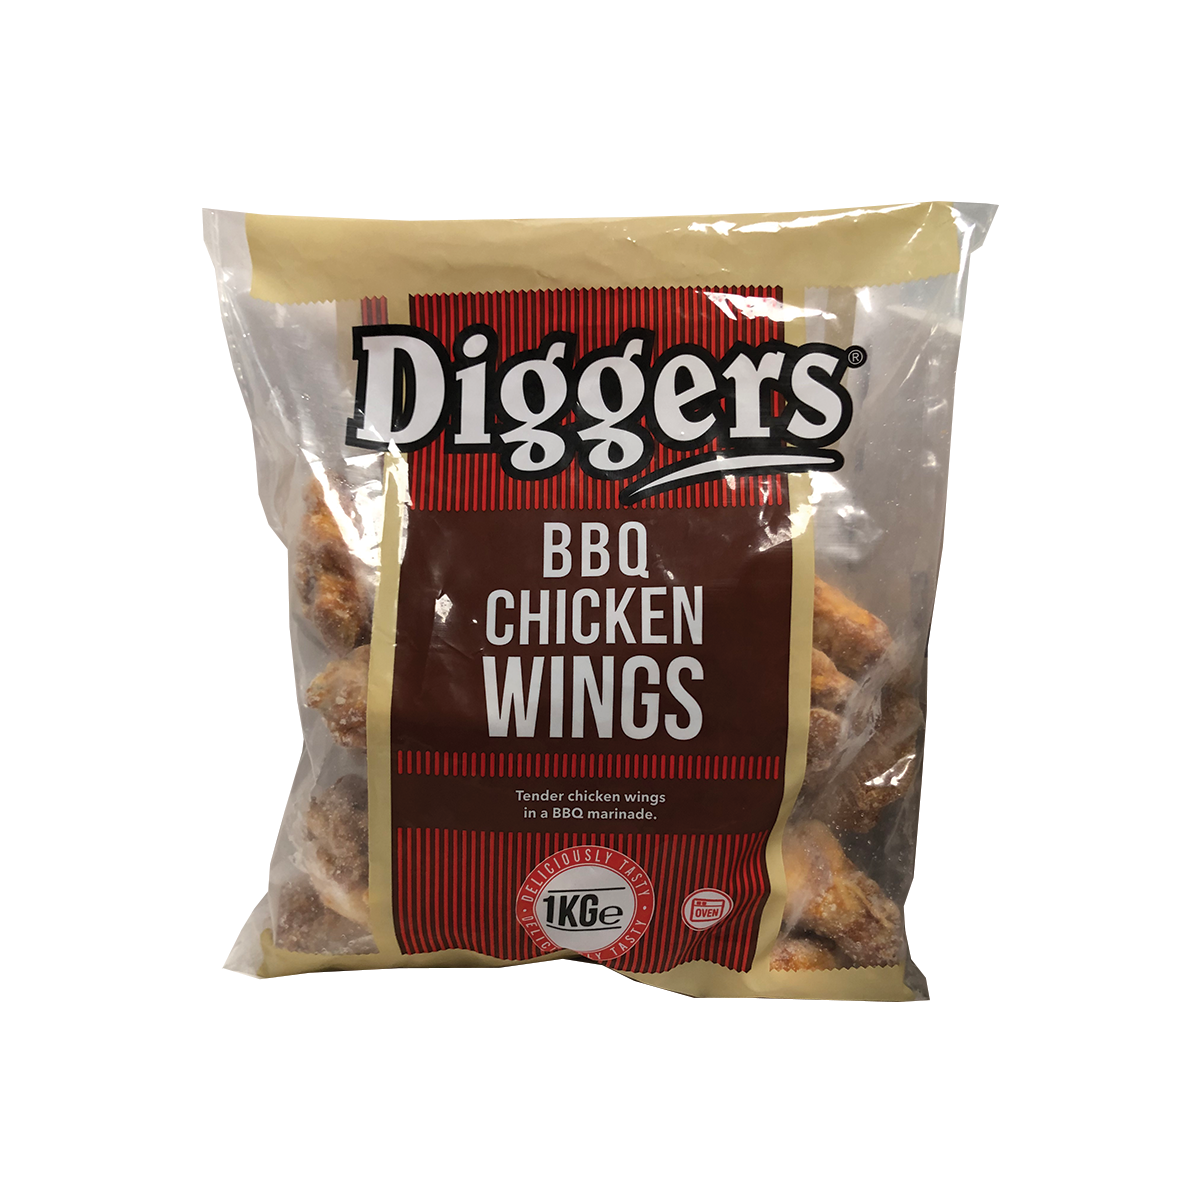 Diggers BBQ Chicken Wings